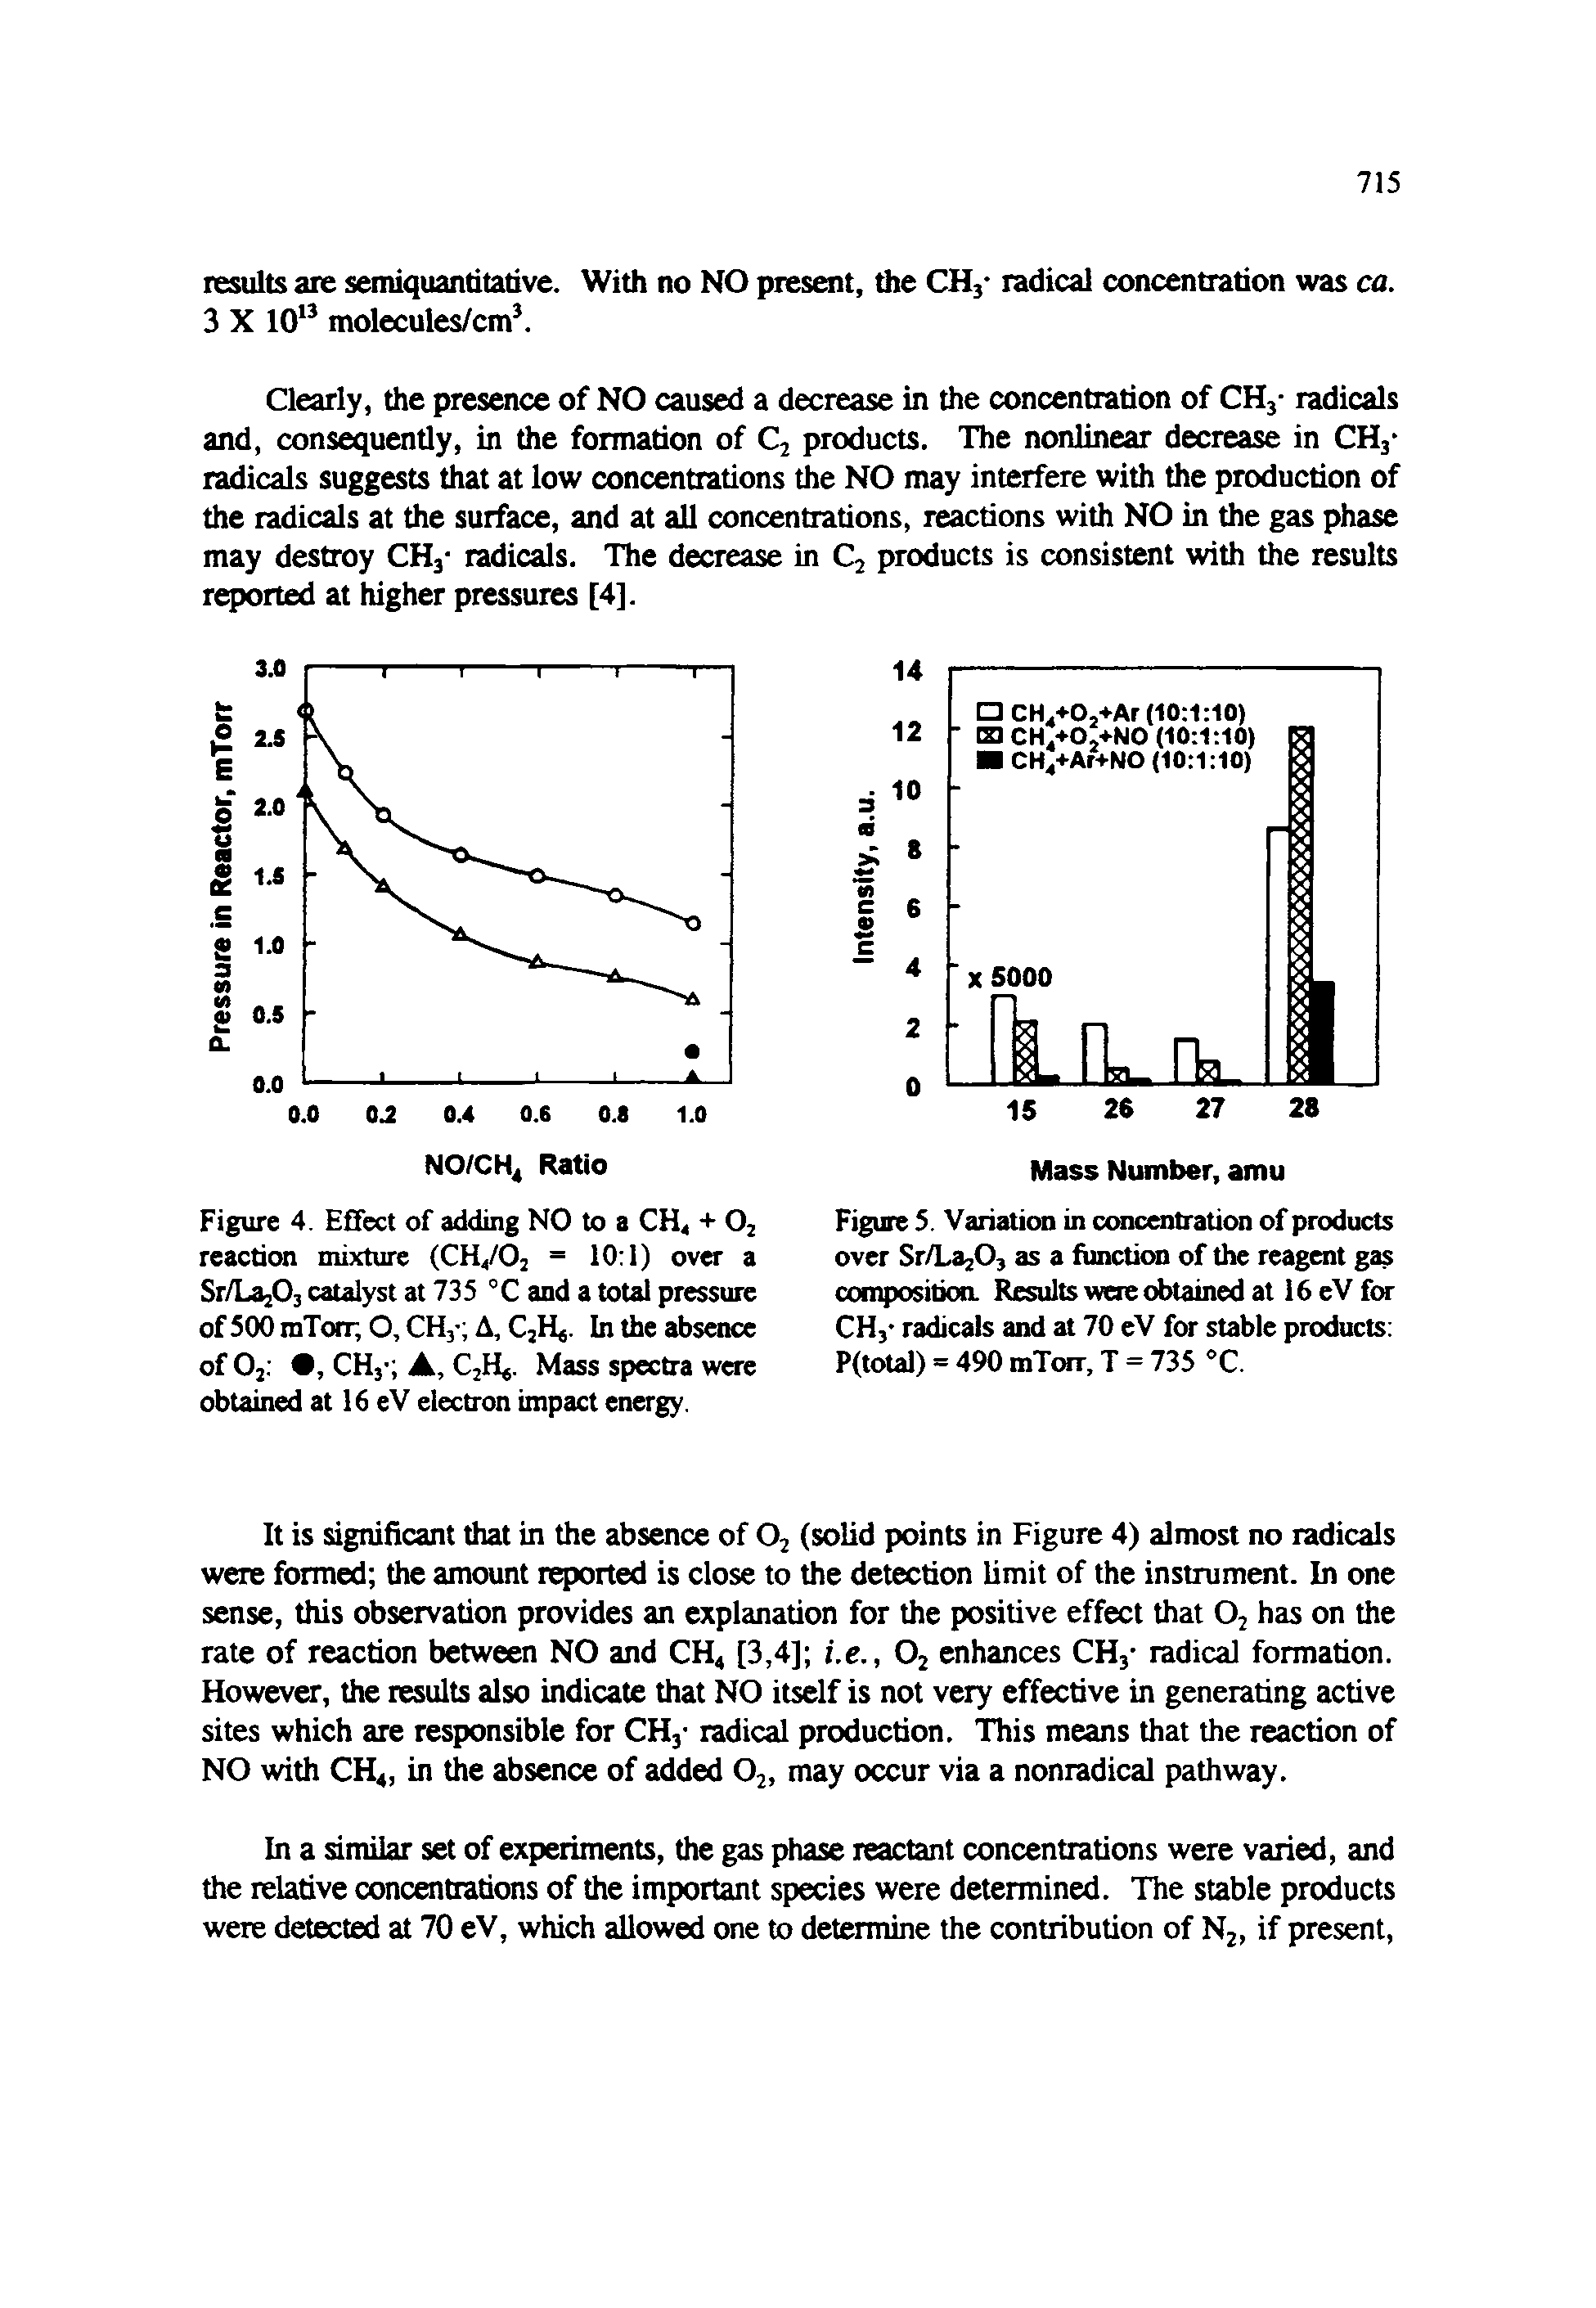 Figure 4. Effect of adding NO to a CH< + Oj reaction mixture (CH4/O2 = 10 1) over a Sr/La203 catalyst at 735 °C and a total pressure of500raTotr, O.CHj A, CjHj. In the absence of Oj. , CHj- A, CjH. Mass spectra were obtained at 16 eV electron impact energy.